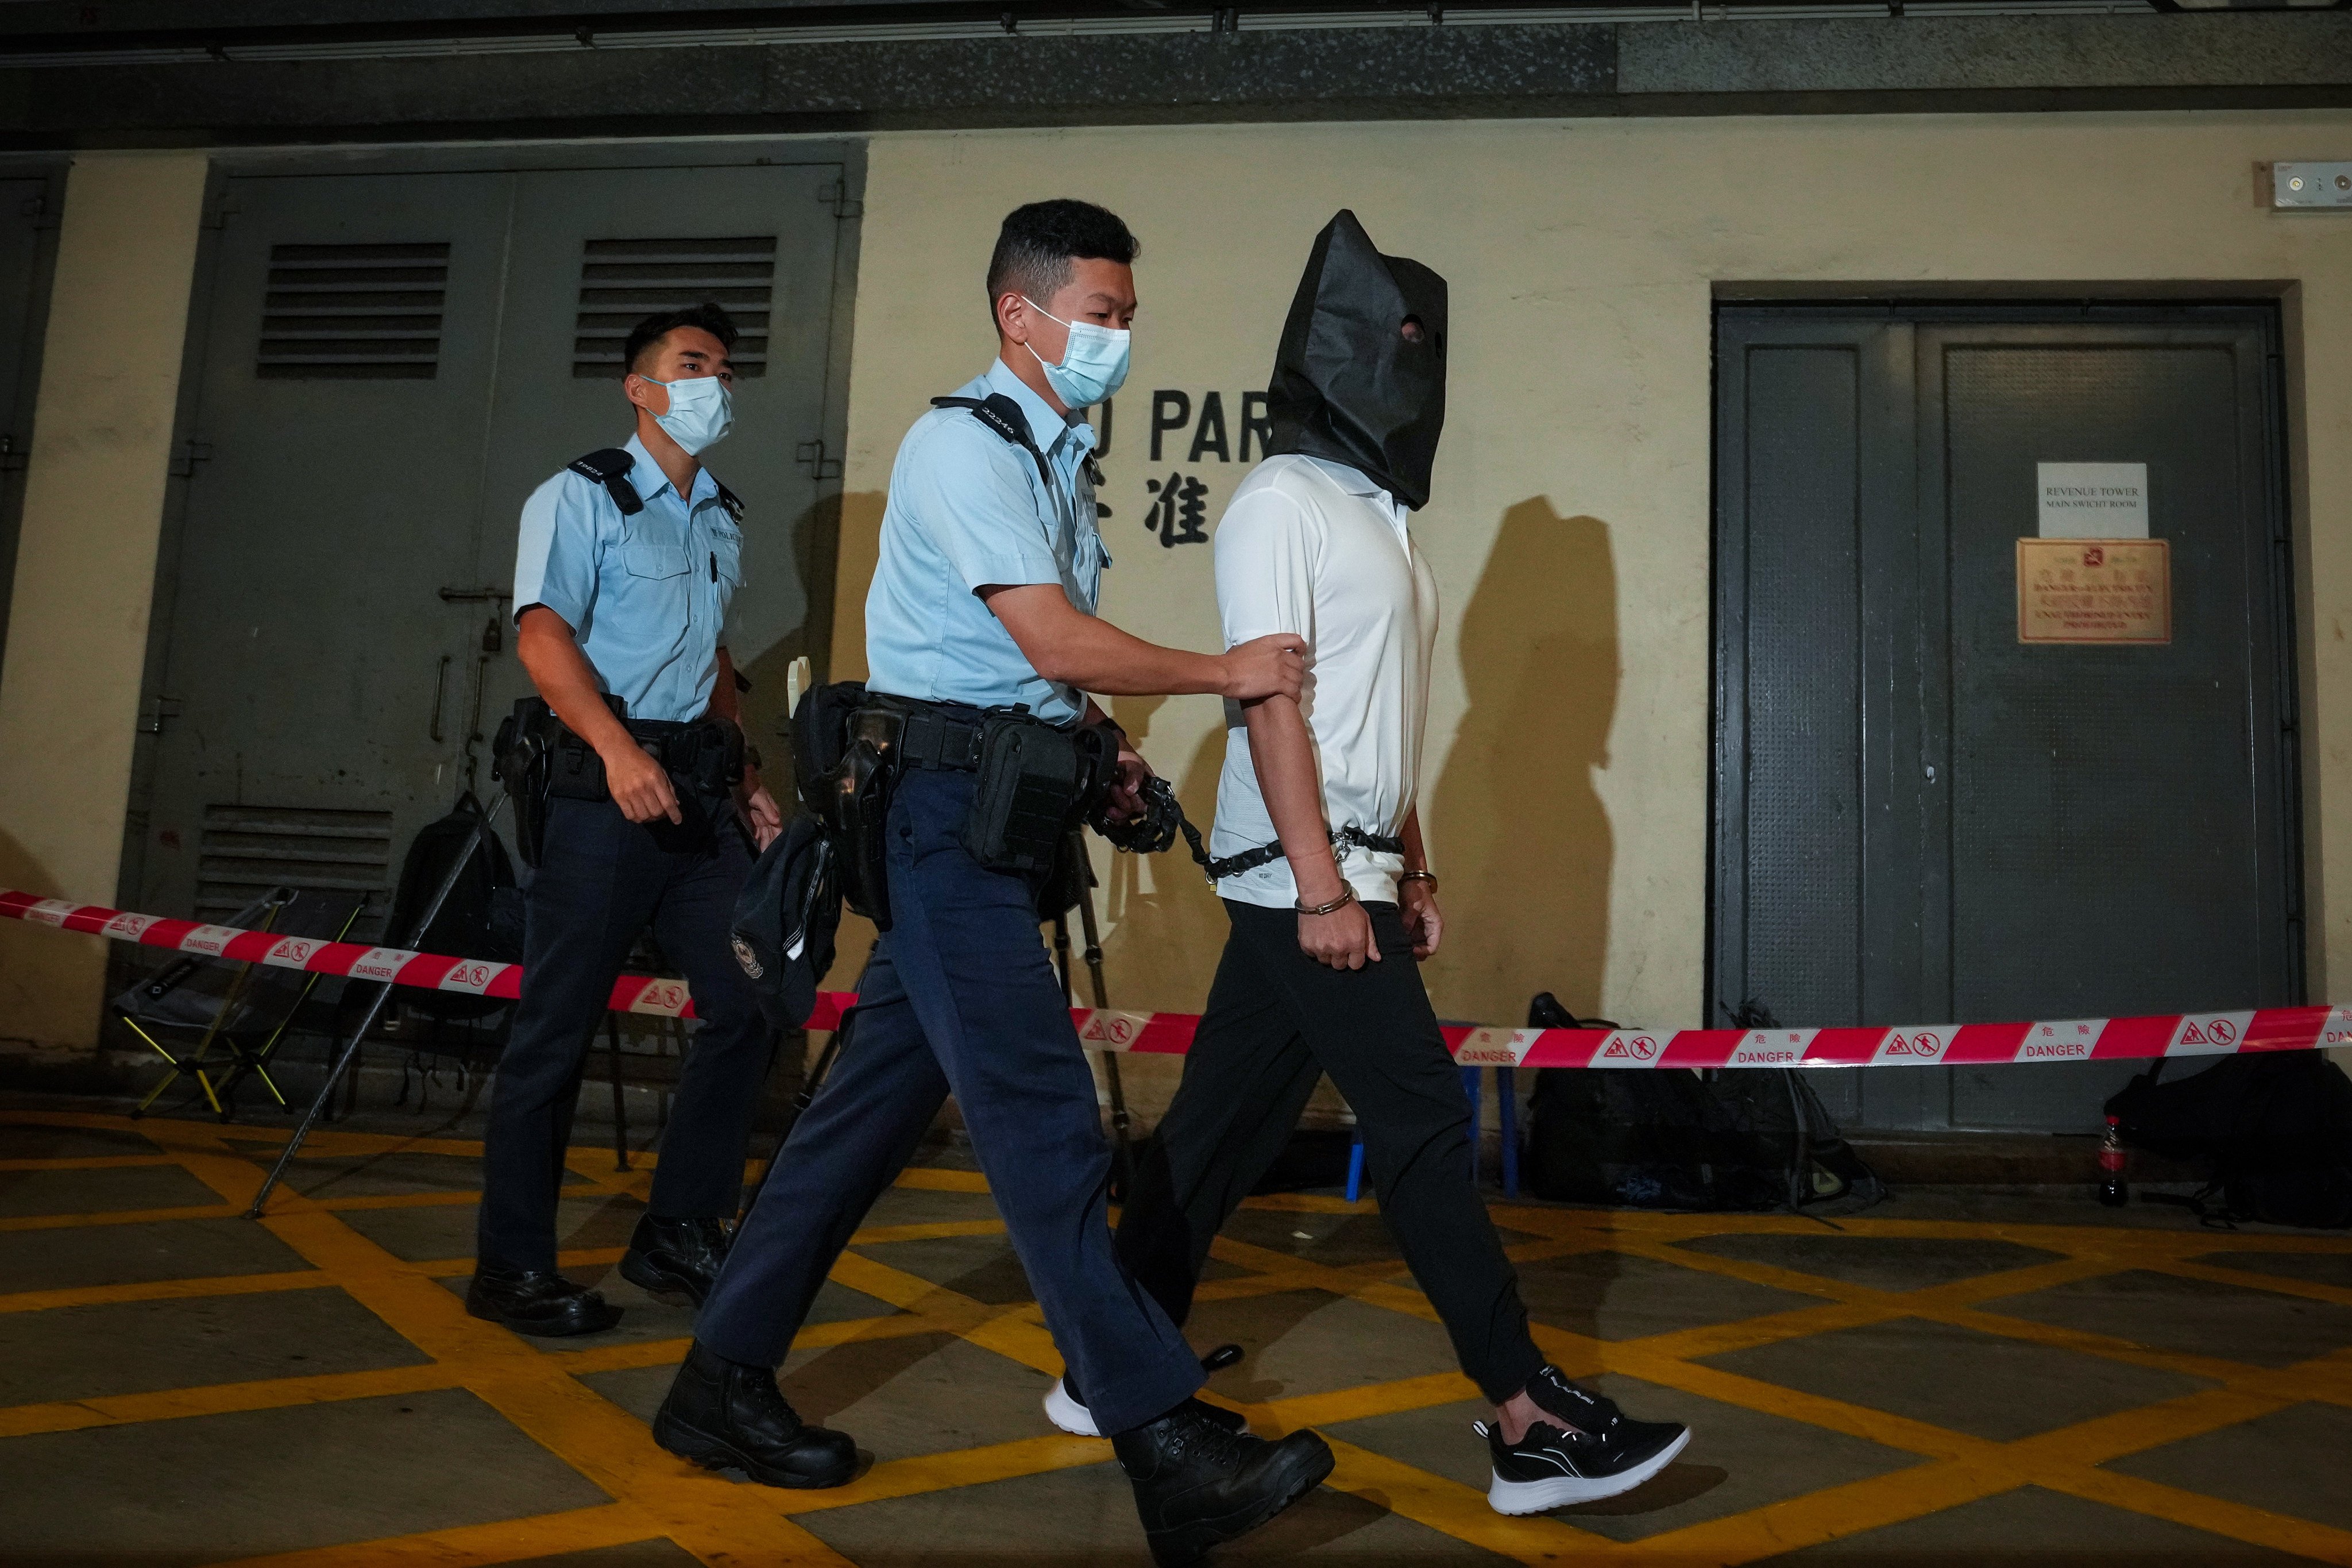 Tang Kai-yin, who has been jailed for 46 months, is escorted to court for an earlier appearance on charges of making petrol bombs and attempting to avoid justice by fleeing to Taiwan. Photo: Elson Li